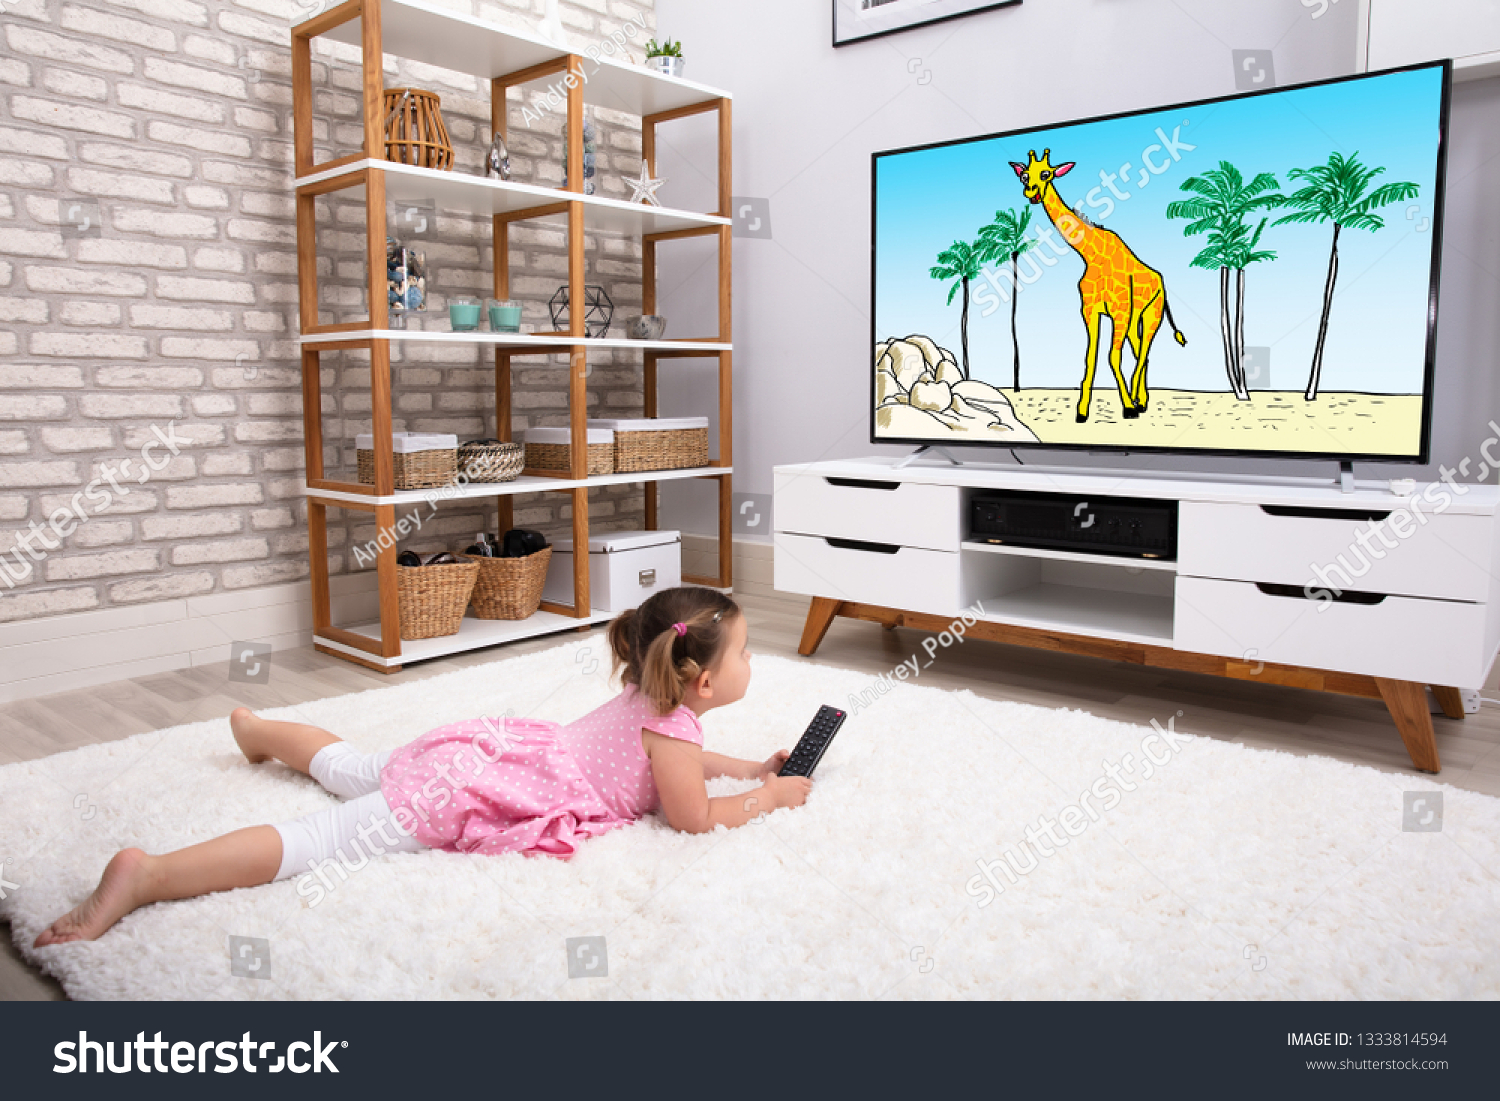 Rear View Of Innocent Girl Lying On Carpet Watching Cartoon On Television #1333814594